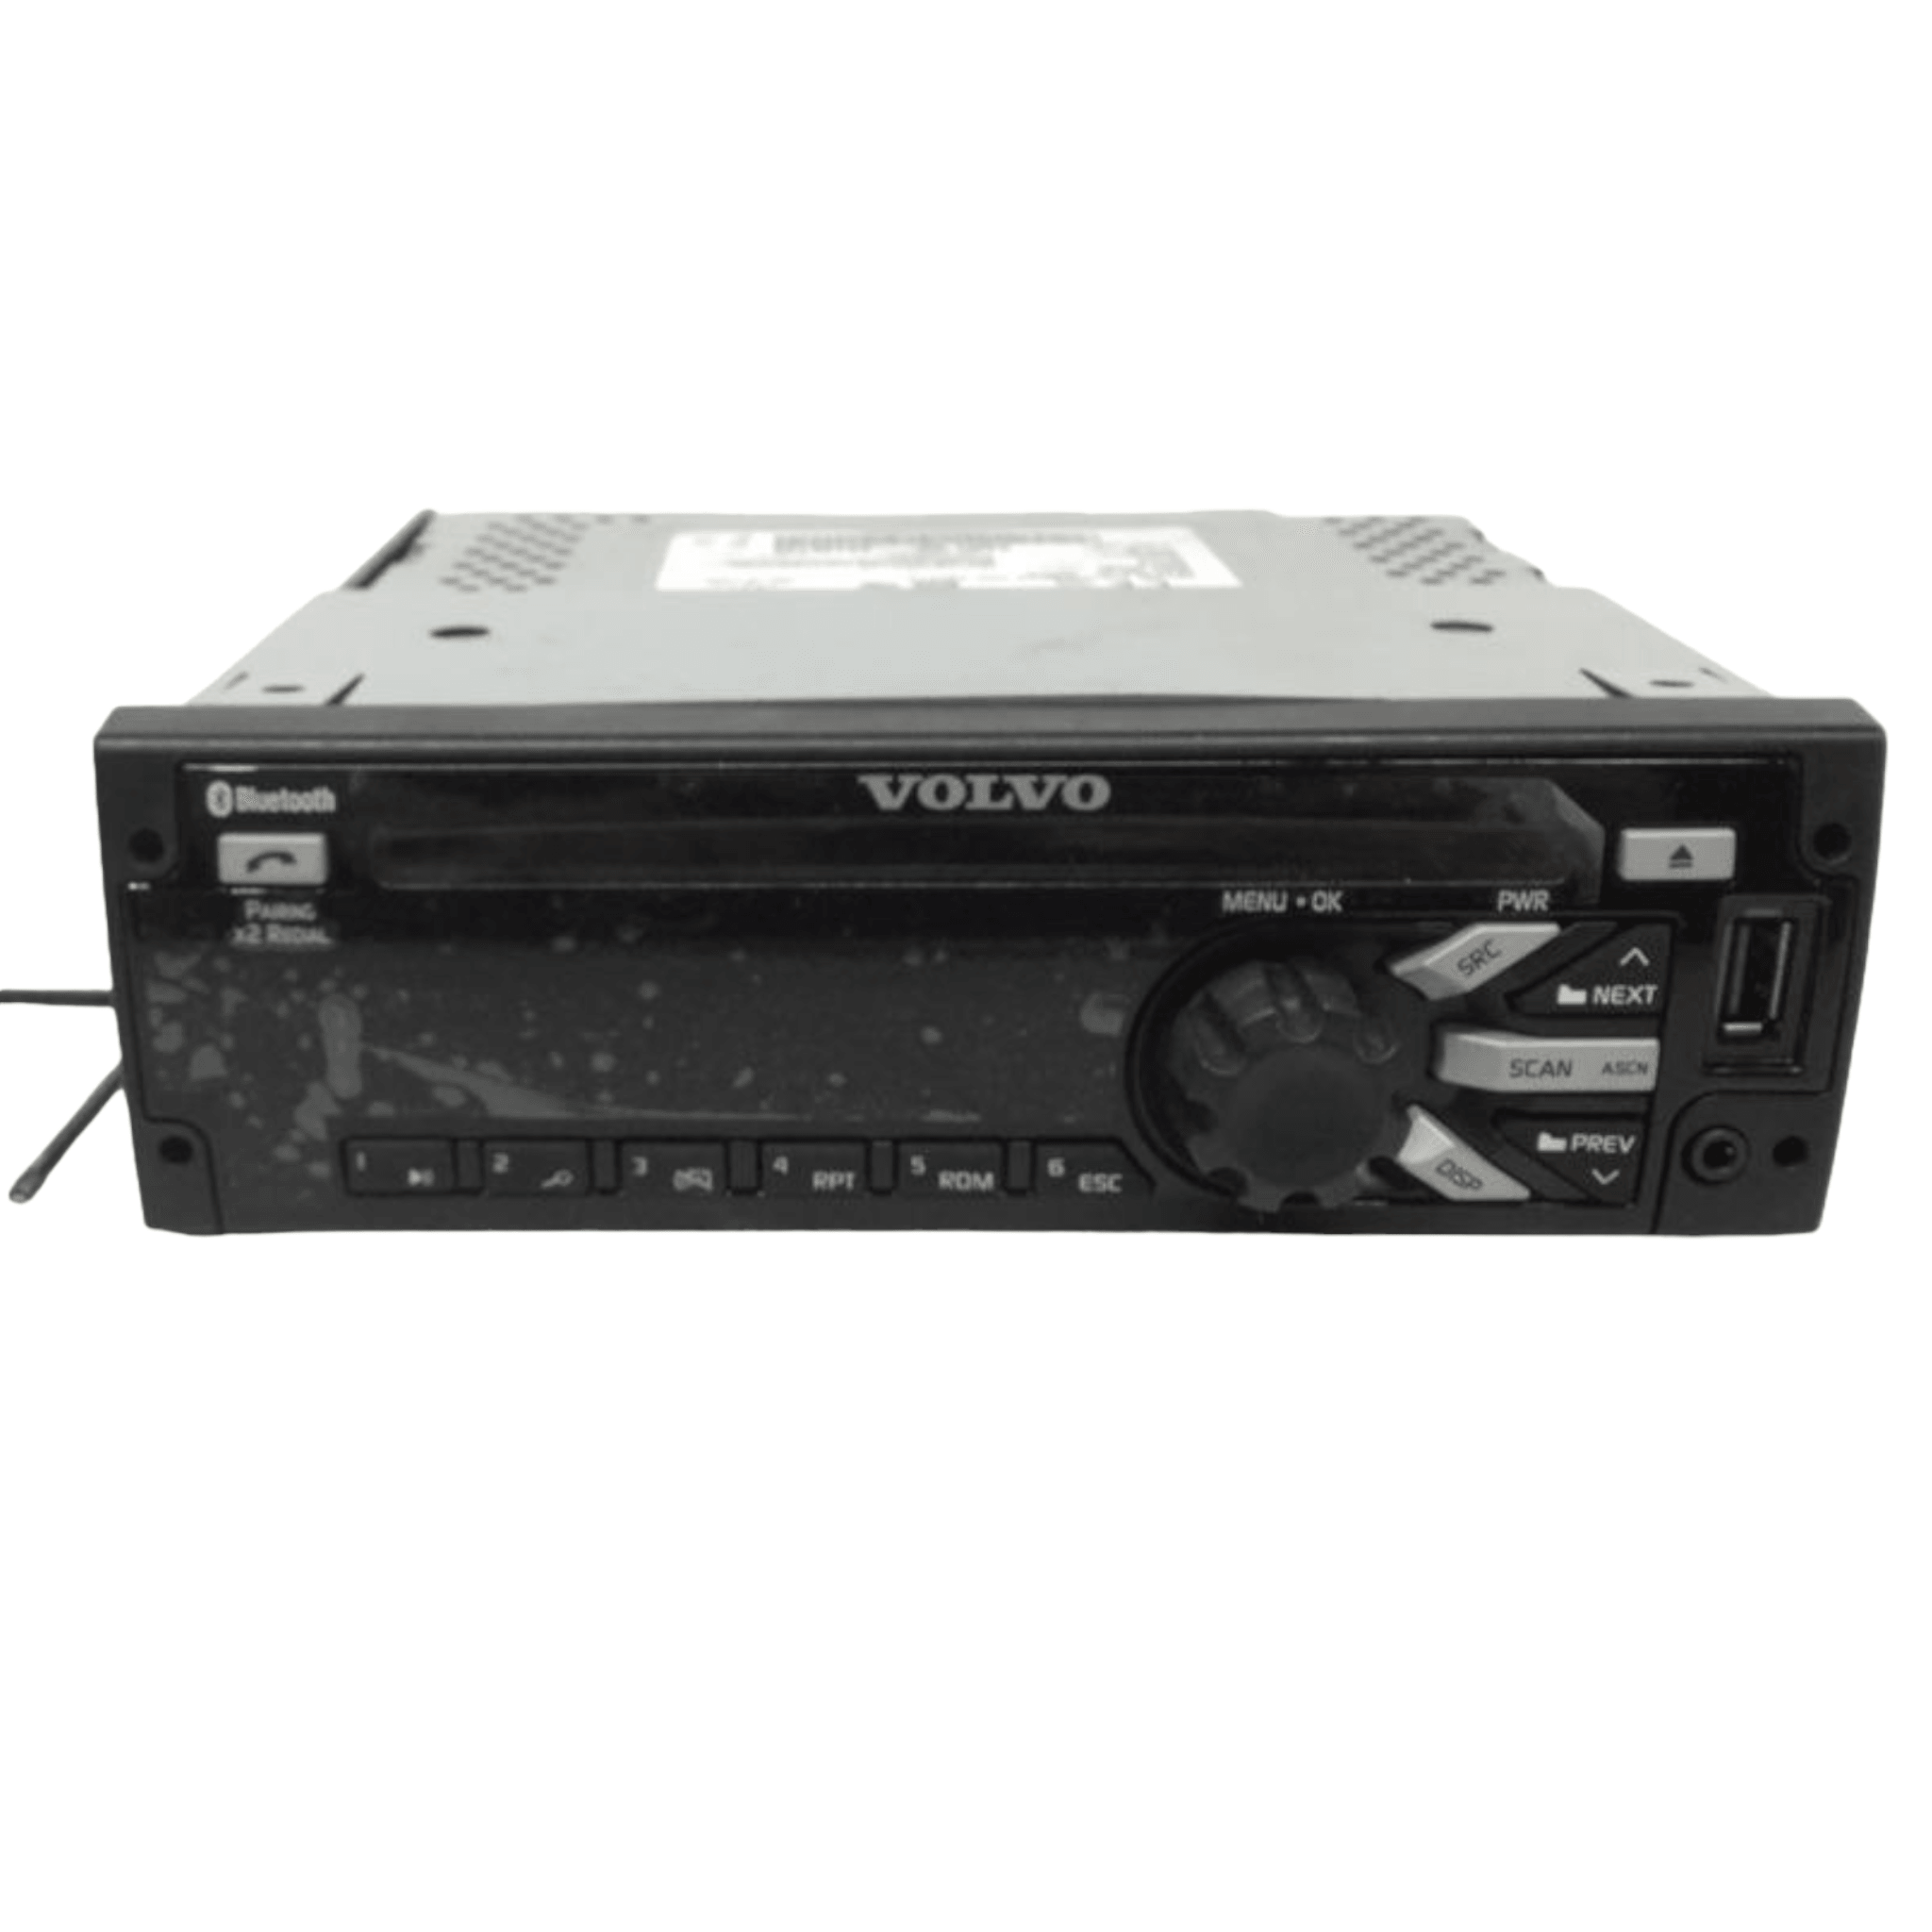 23728224 Genuine Volvo Radio With Tape And/Or Cd Player